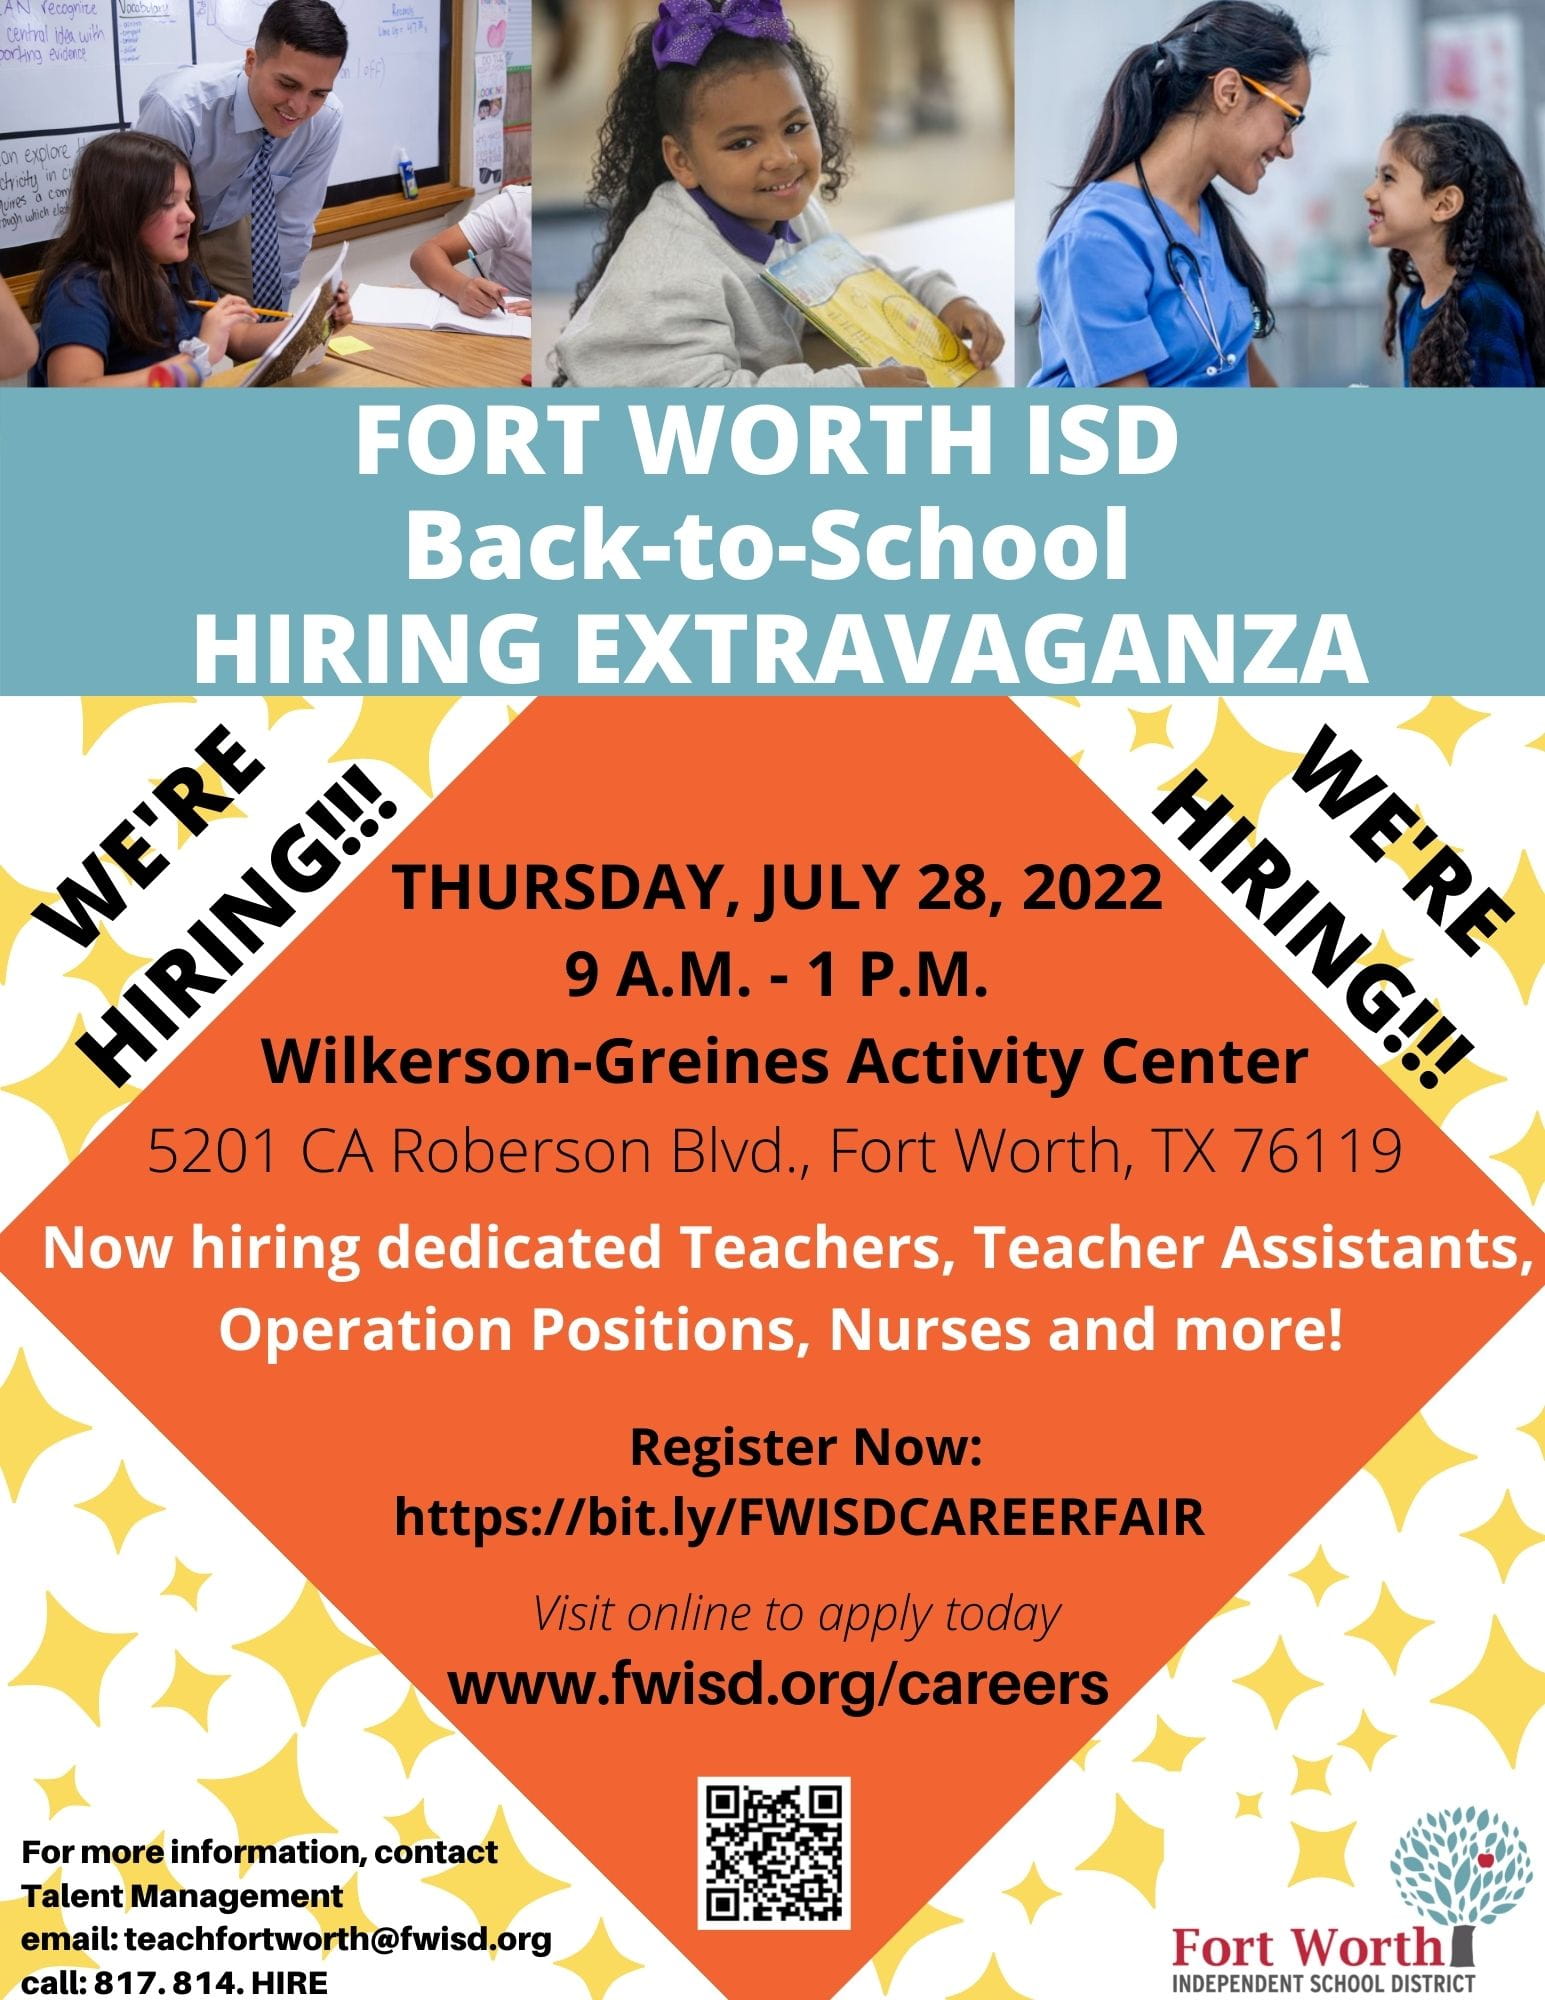 Fort Worth ISD Back-to-School Hiring Extravaganza Flyer, July 28